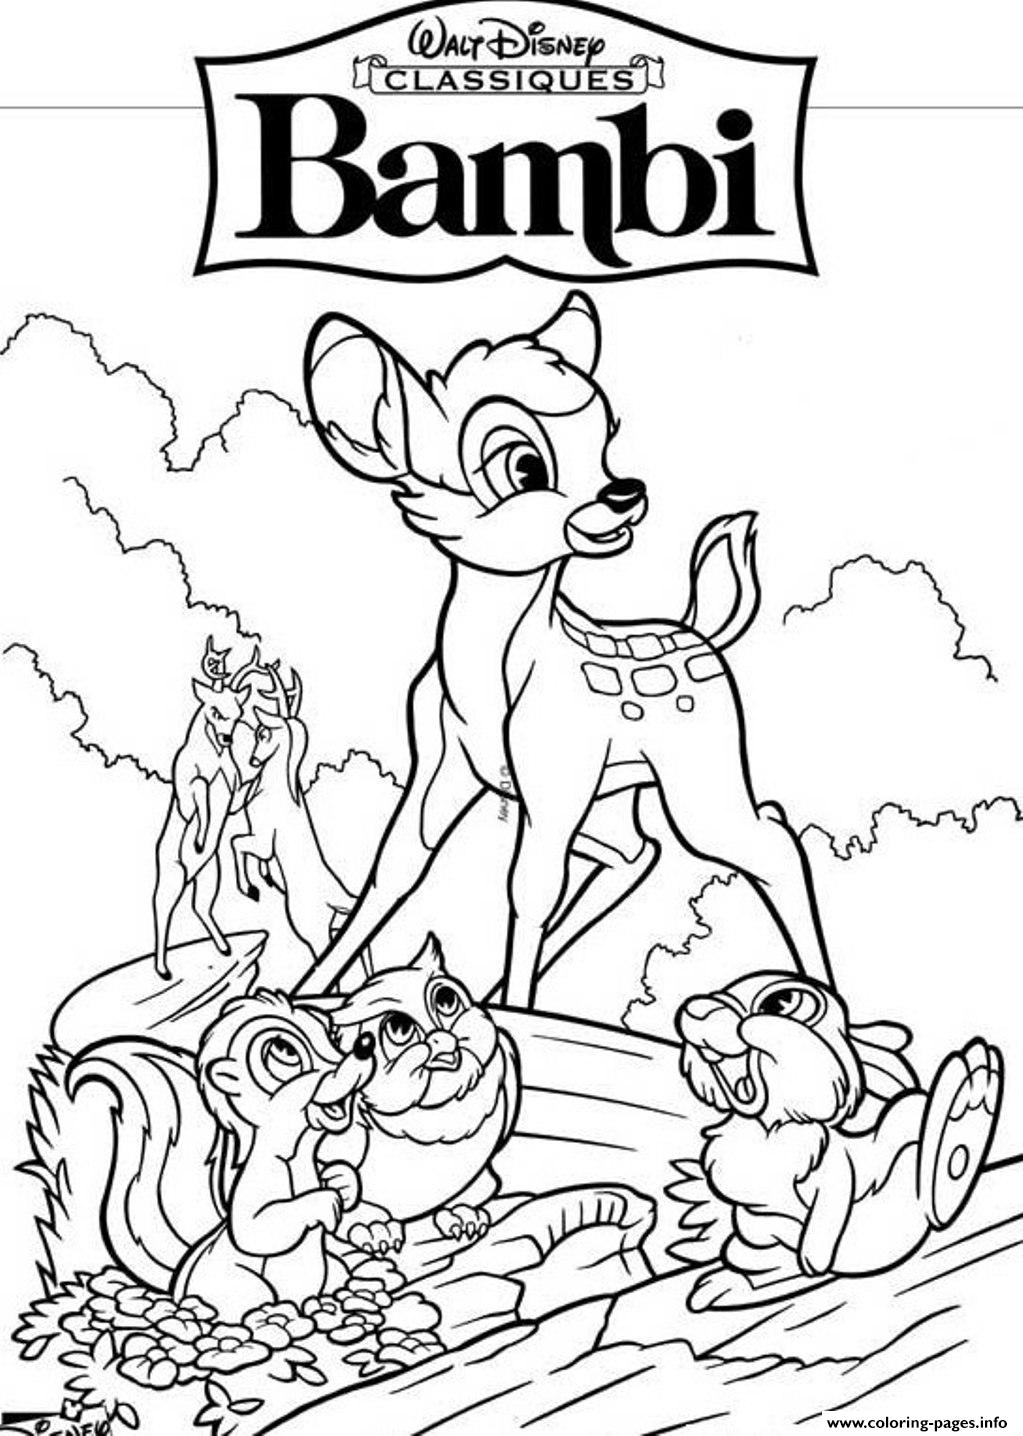 Disney Bambi 7549 Coloring Pages Printable